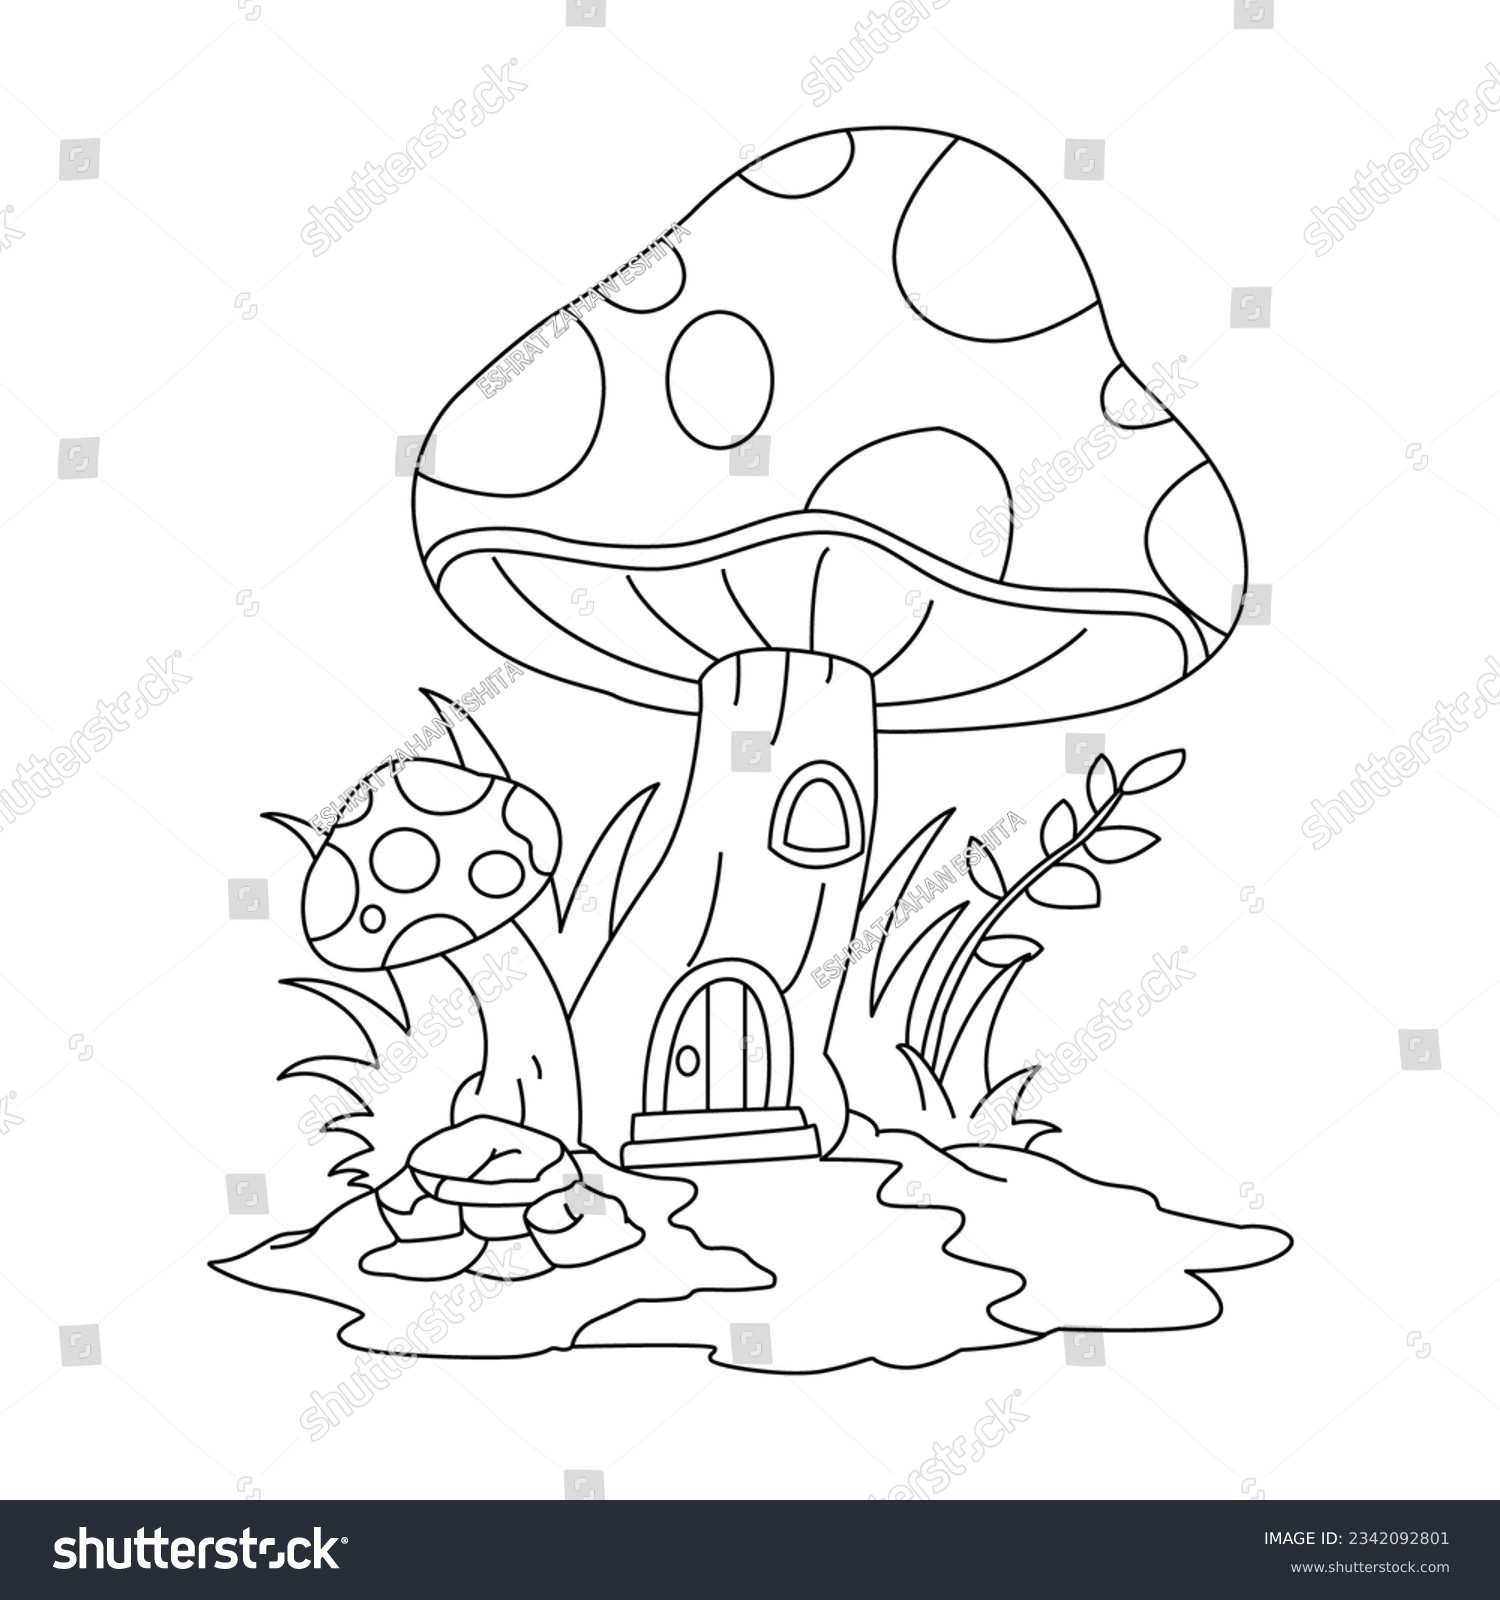 SVG of Cartoon fantasy graphic fairy house with tress and template, magic hobbit home vector illustration in black and white for games, decor, coloring book pages,line draw, line art, coloring pages,kids  svg